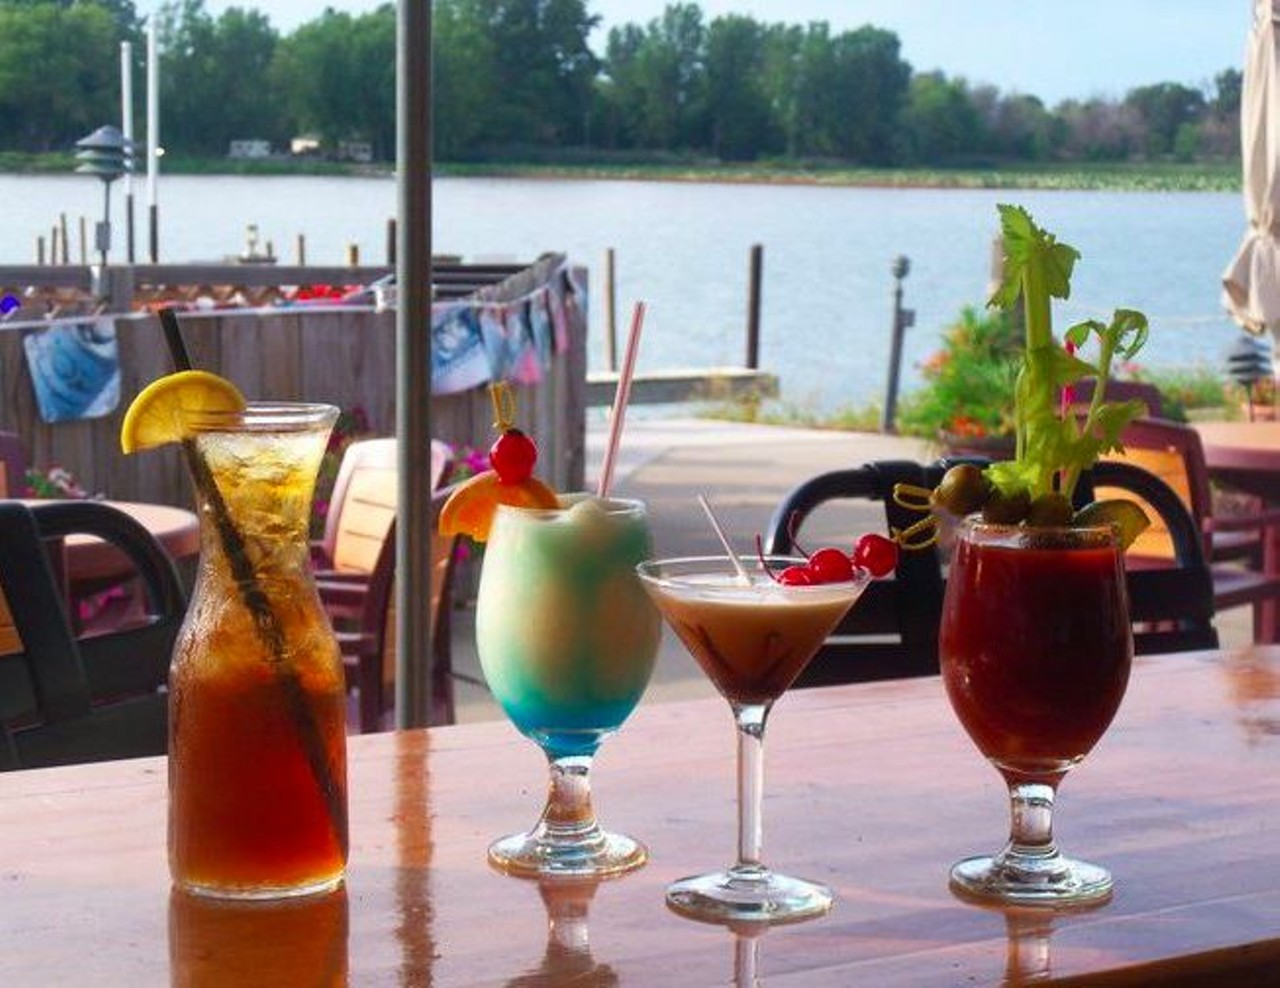 Webber&#146;s Waterfront Restaurant & Lounge
6339 Edgewater Dr., Erie; 734-723-7411
For more than 30 years, Webber&#146;s Waterfront Restaurant has been owned and operated by the Merryman family. Facing the Ottawa River, right on the edge of the Michigan and Ohio border, Webber&#146;s offers drinks such as Electric Lemonade and Cucumber Lime Clamdigger. If these mixed drinks aren&#146;t for you, you can still sit on their outdoor patio, sip on sangria, and listen to live music on Sundays.